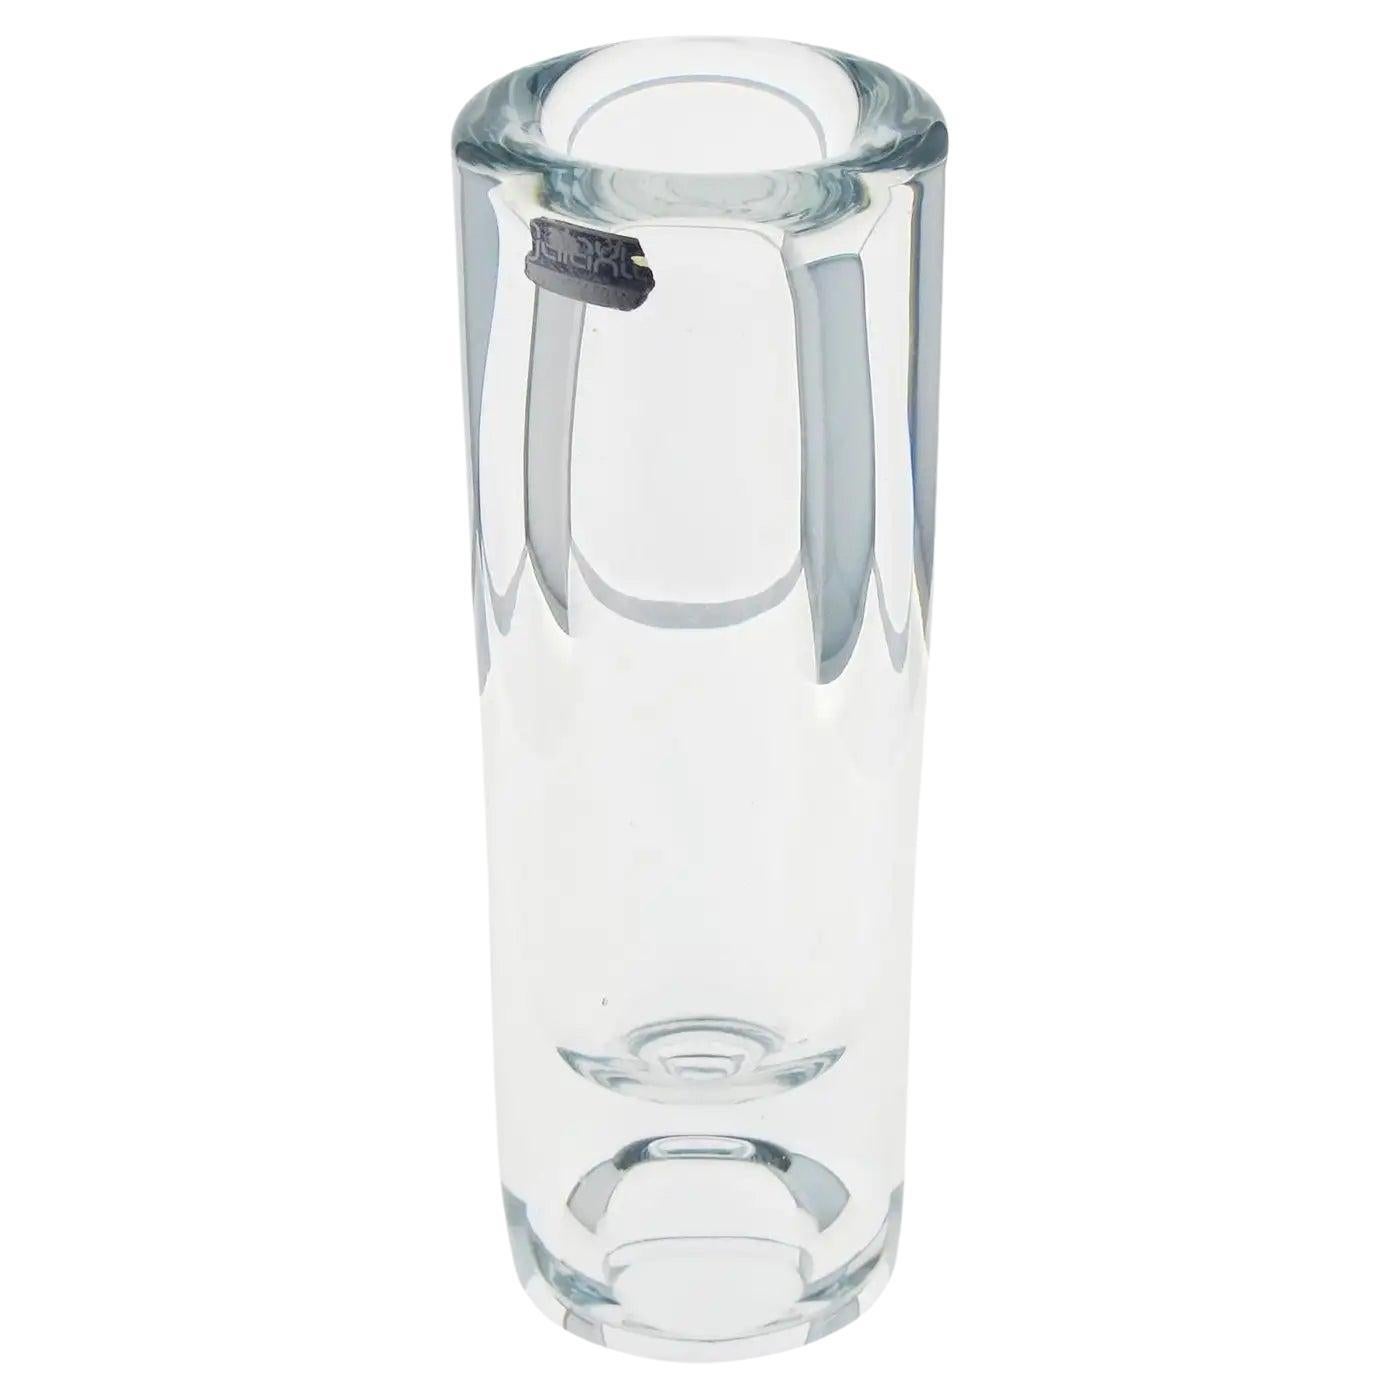 Daum by De Belroy Tall Crystal Tumbler Vase, Galaxie Collection, 1970s For Sale